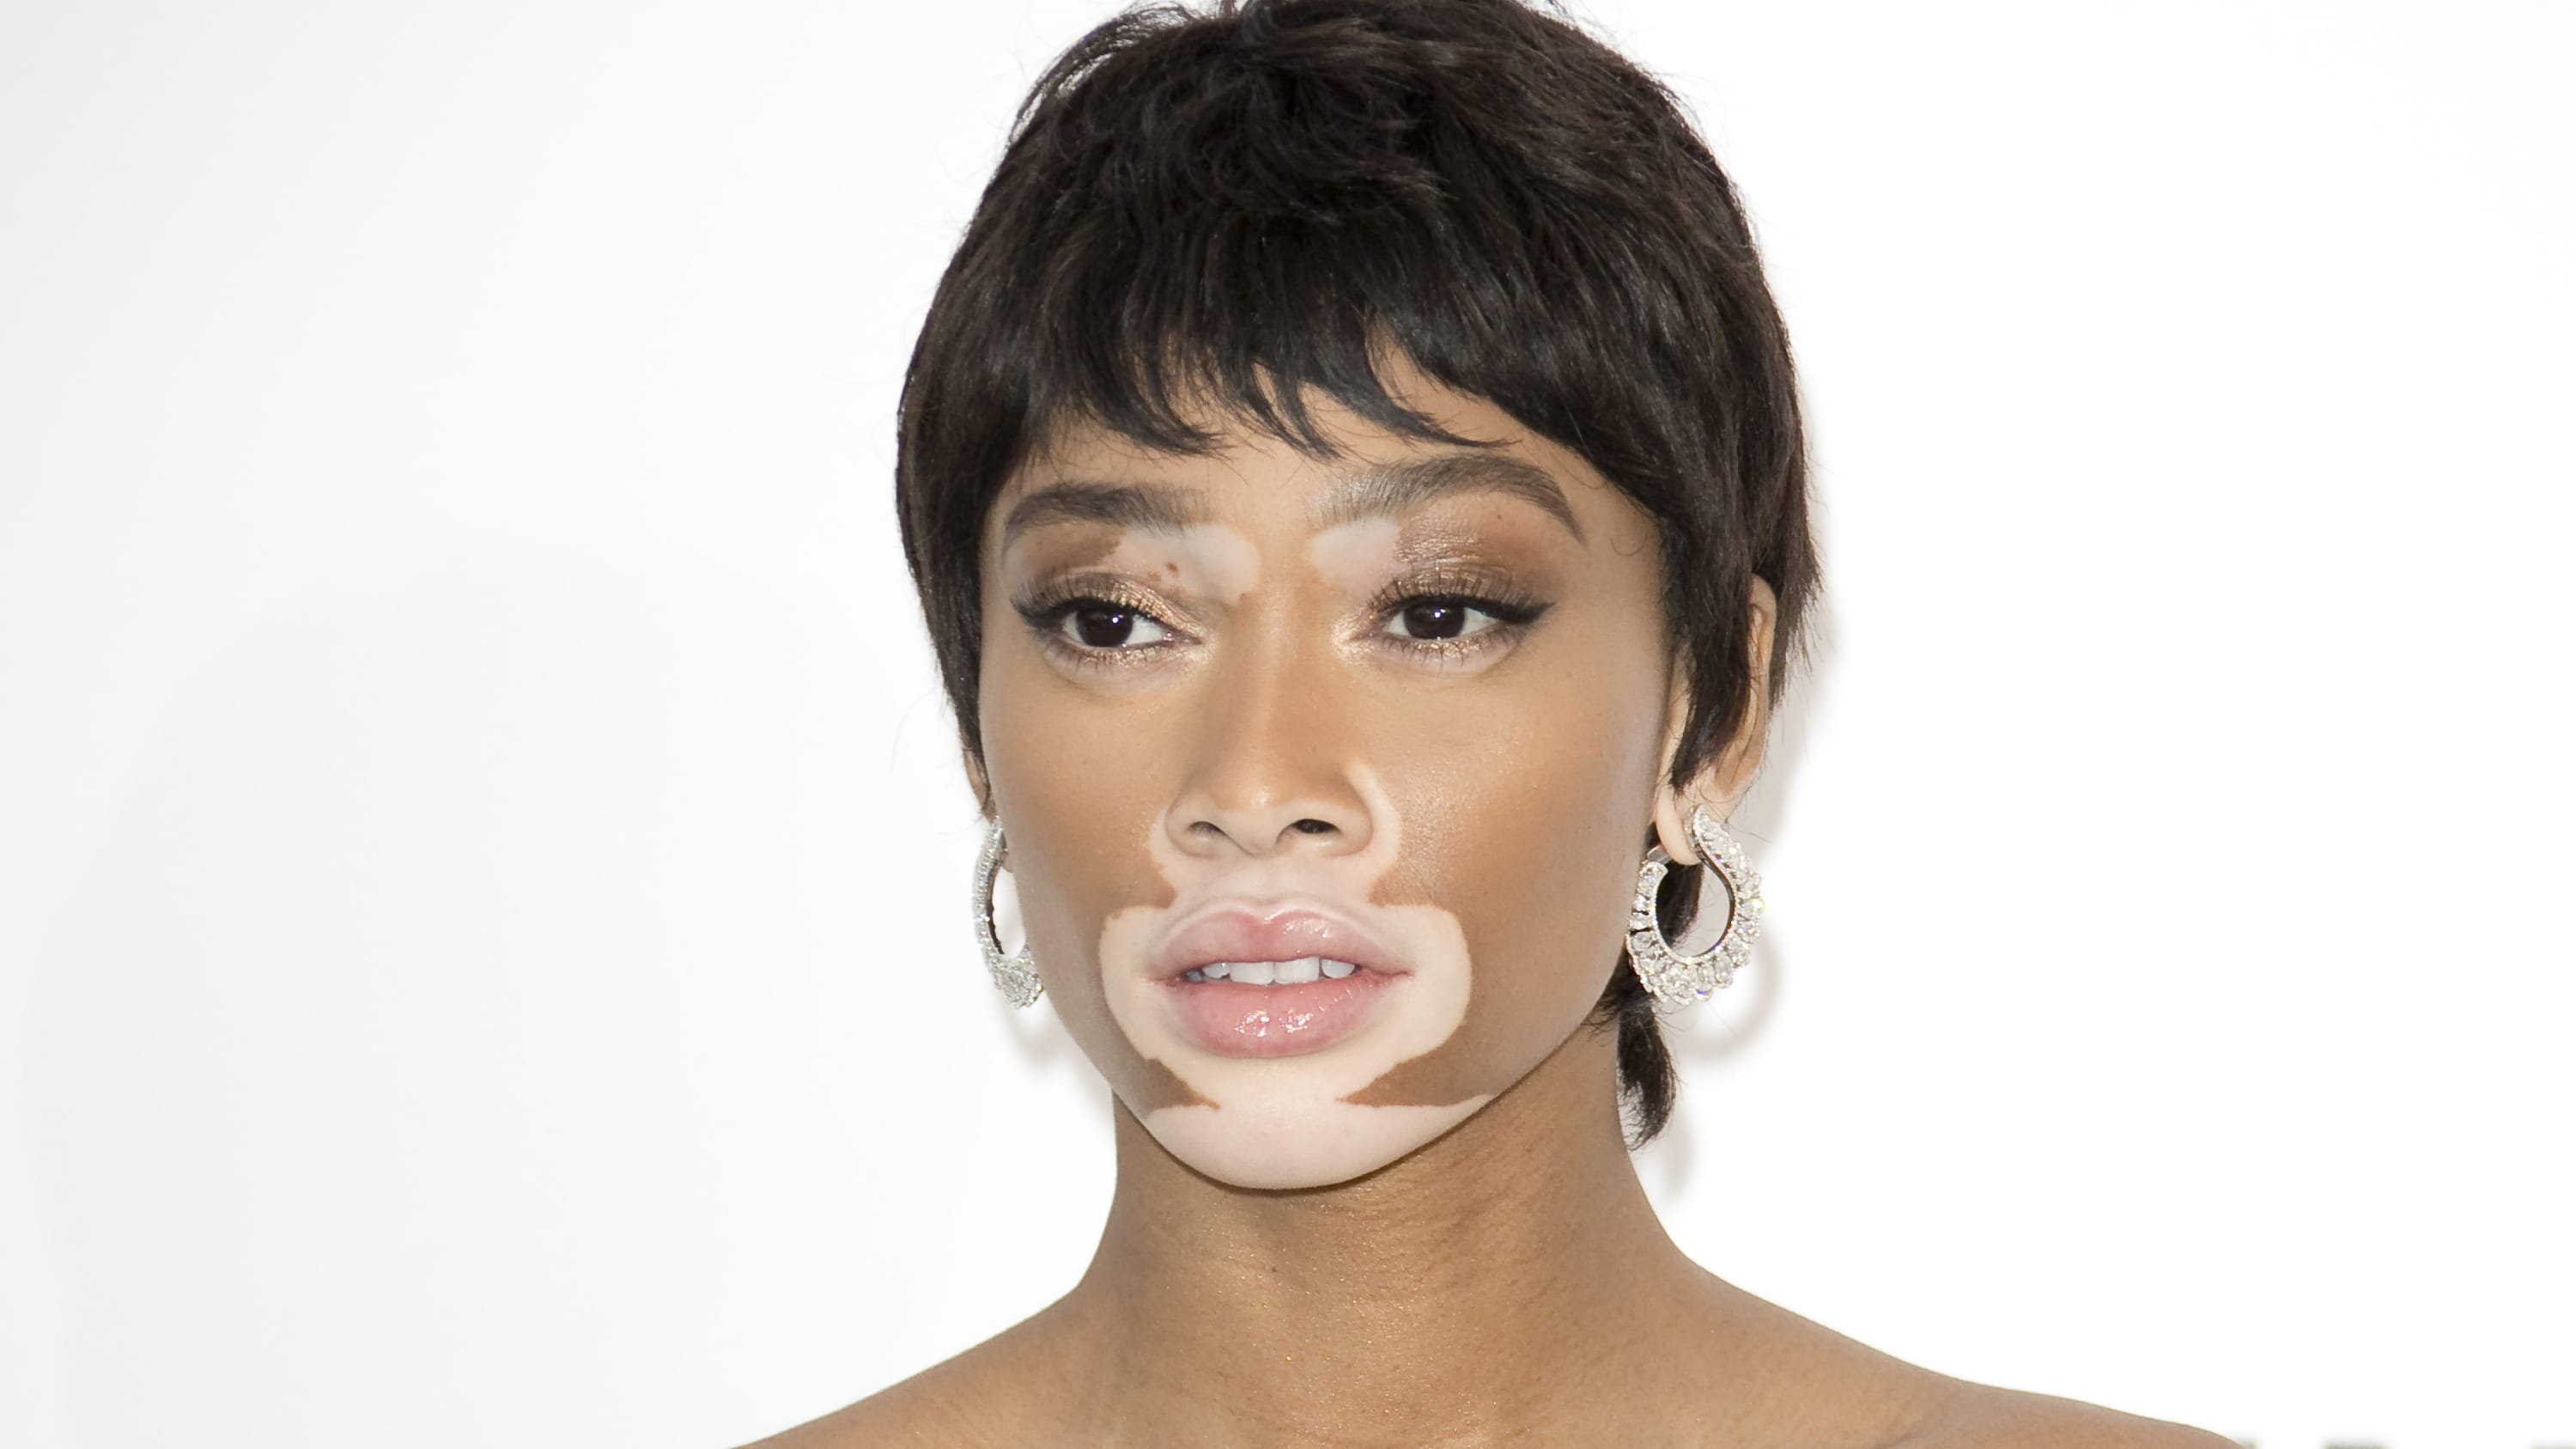 A woman with vitiligo poses for the camera. The vitiligo is a noticeably lighter color than her normal skin color.